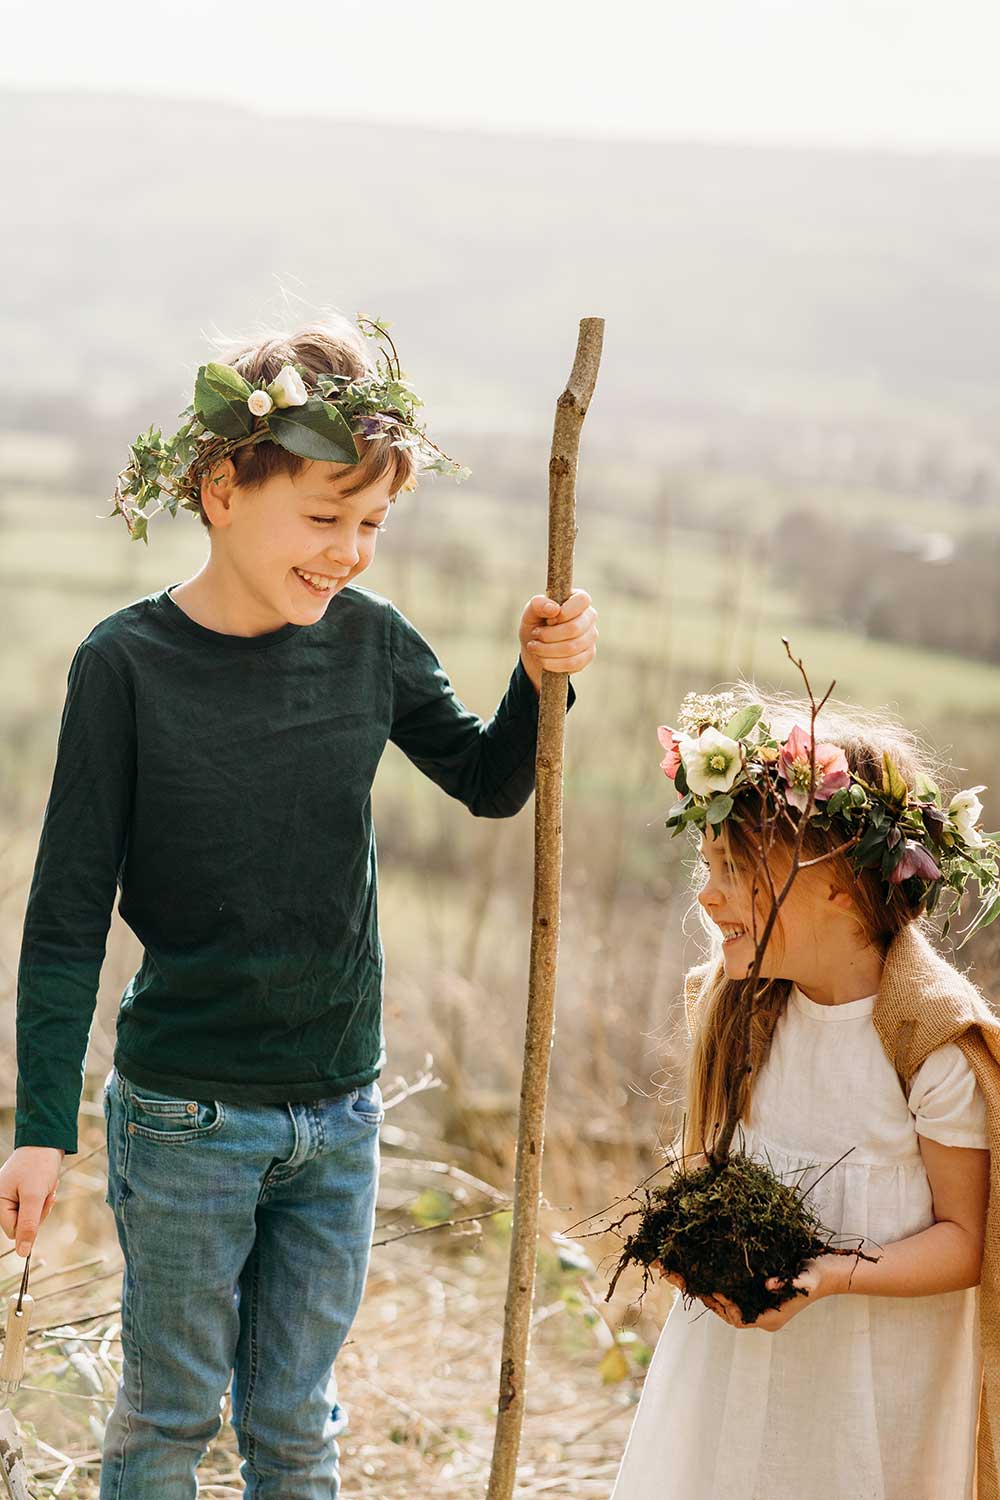 A young boy and girl in the countryside